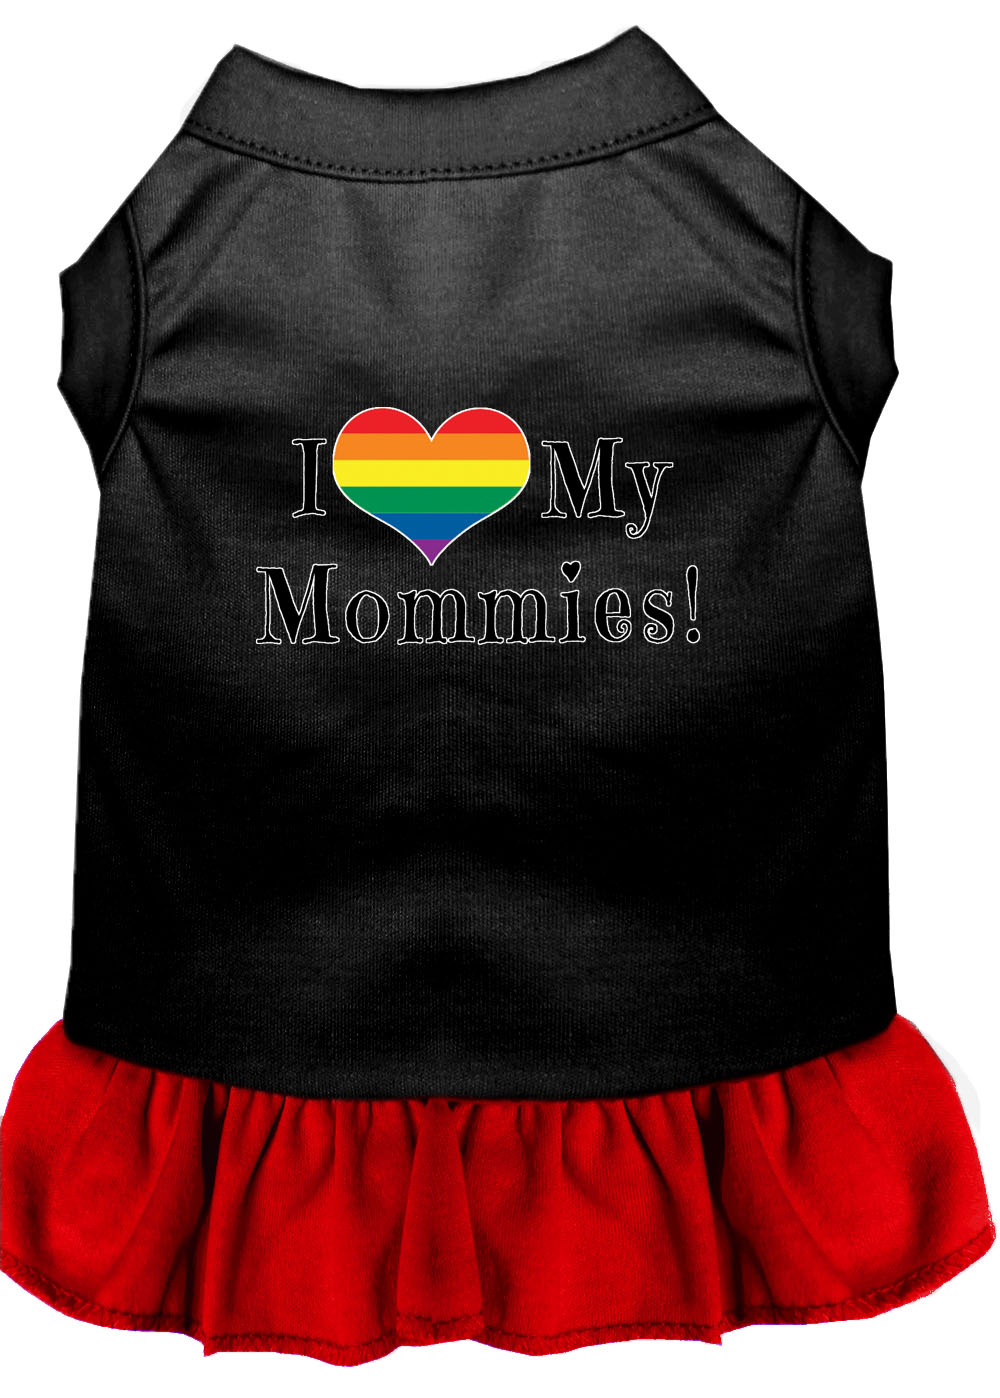 I Heart my Mommies Screen Print Dog Dress Black with Red Sm